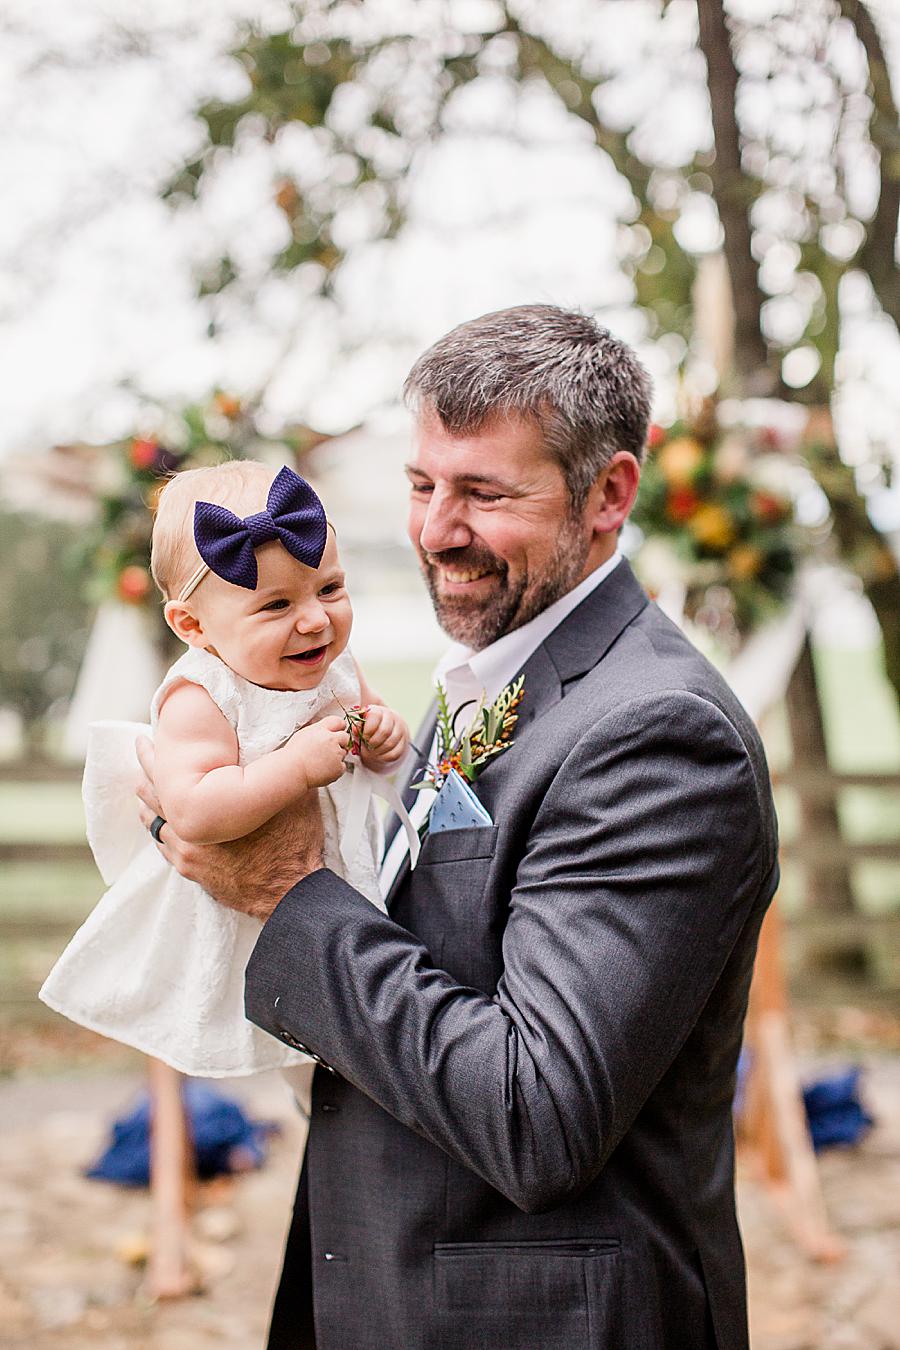 Holding daughter at this RiverView Family Farm wedding by Knoxville Wedding Photographer, Amanda May Photos.